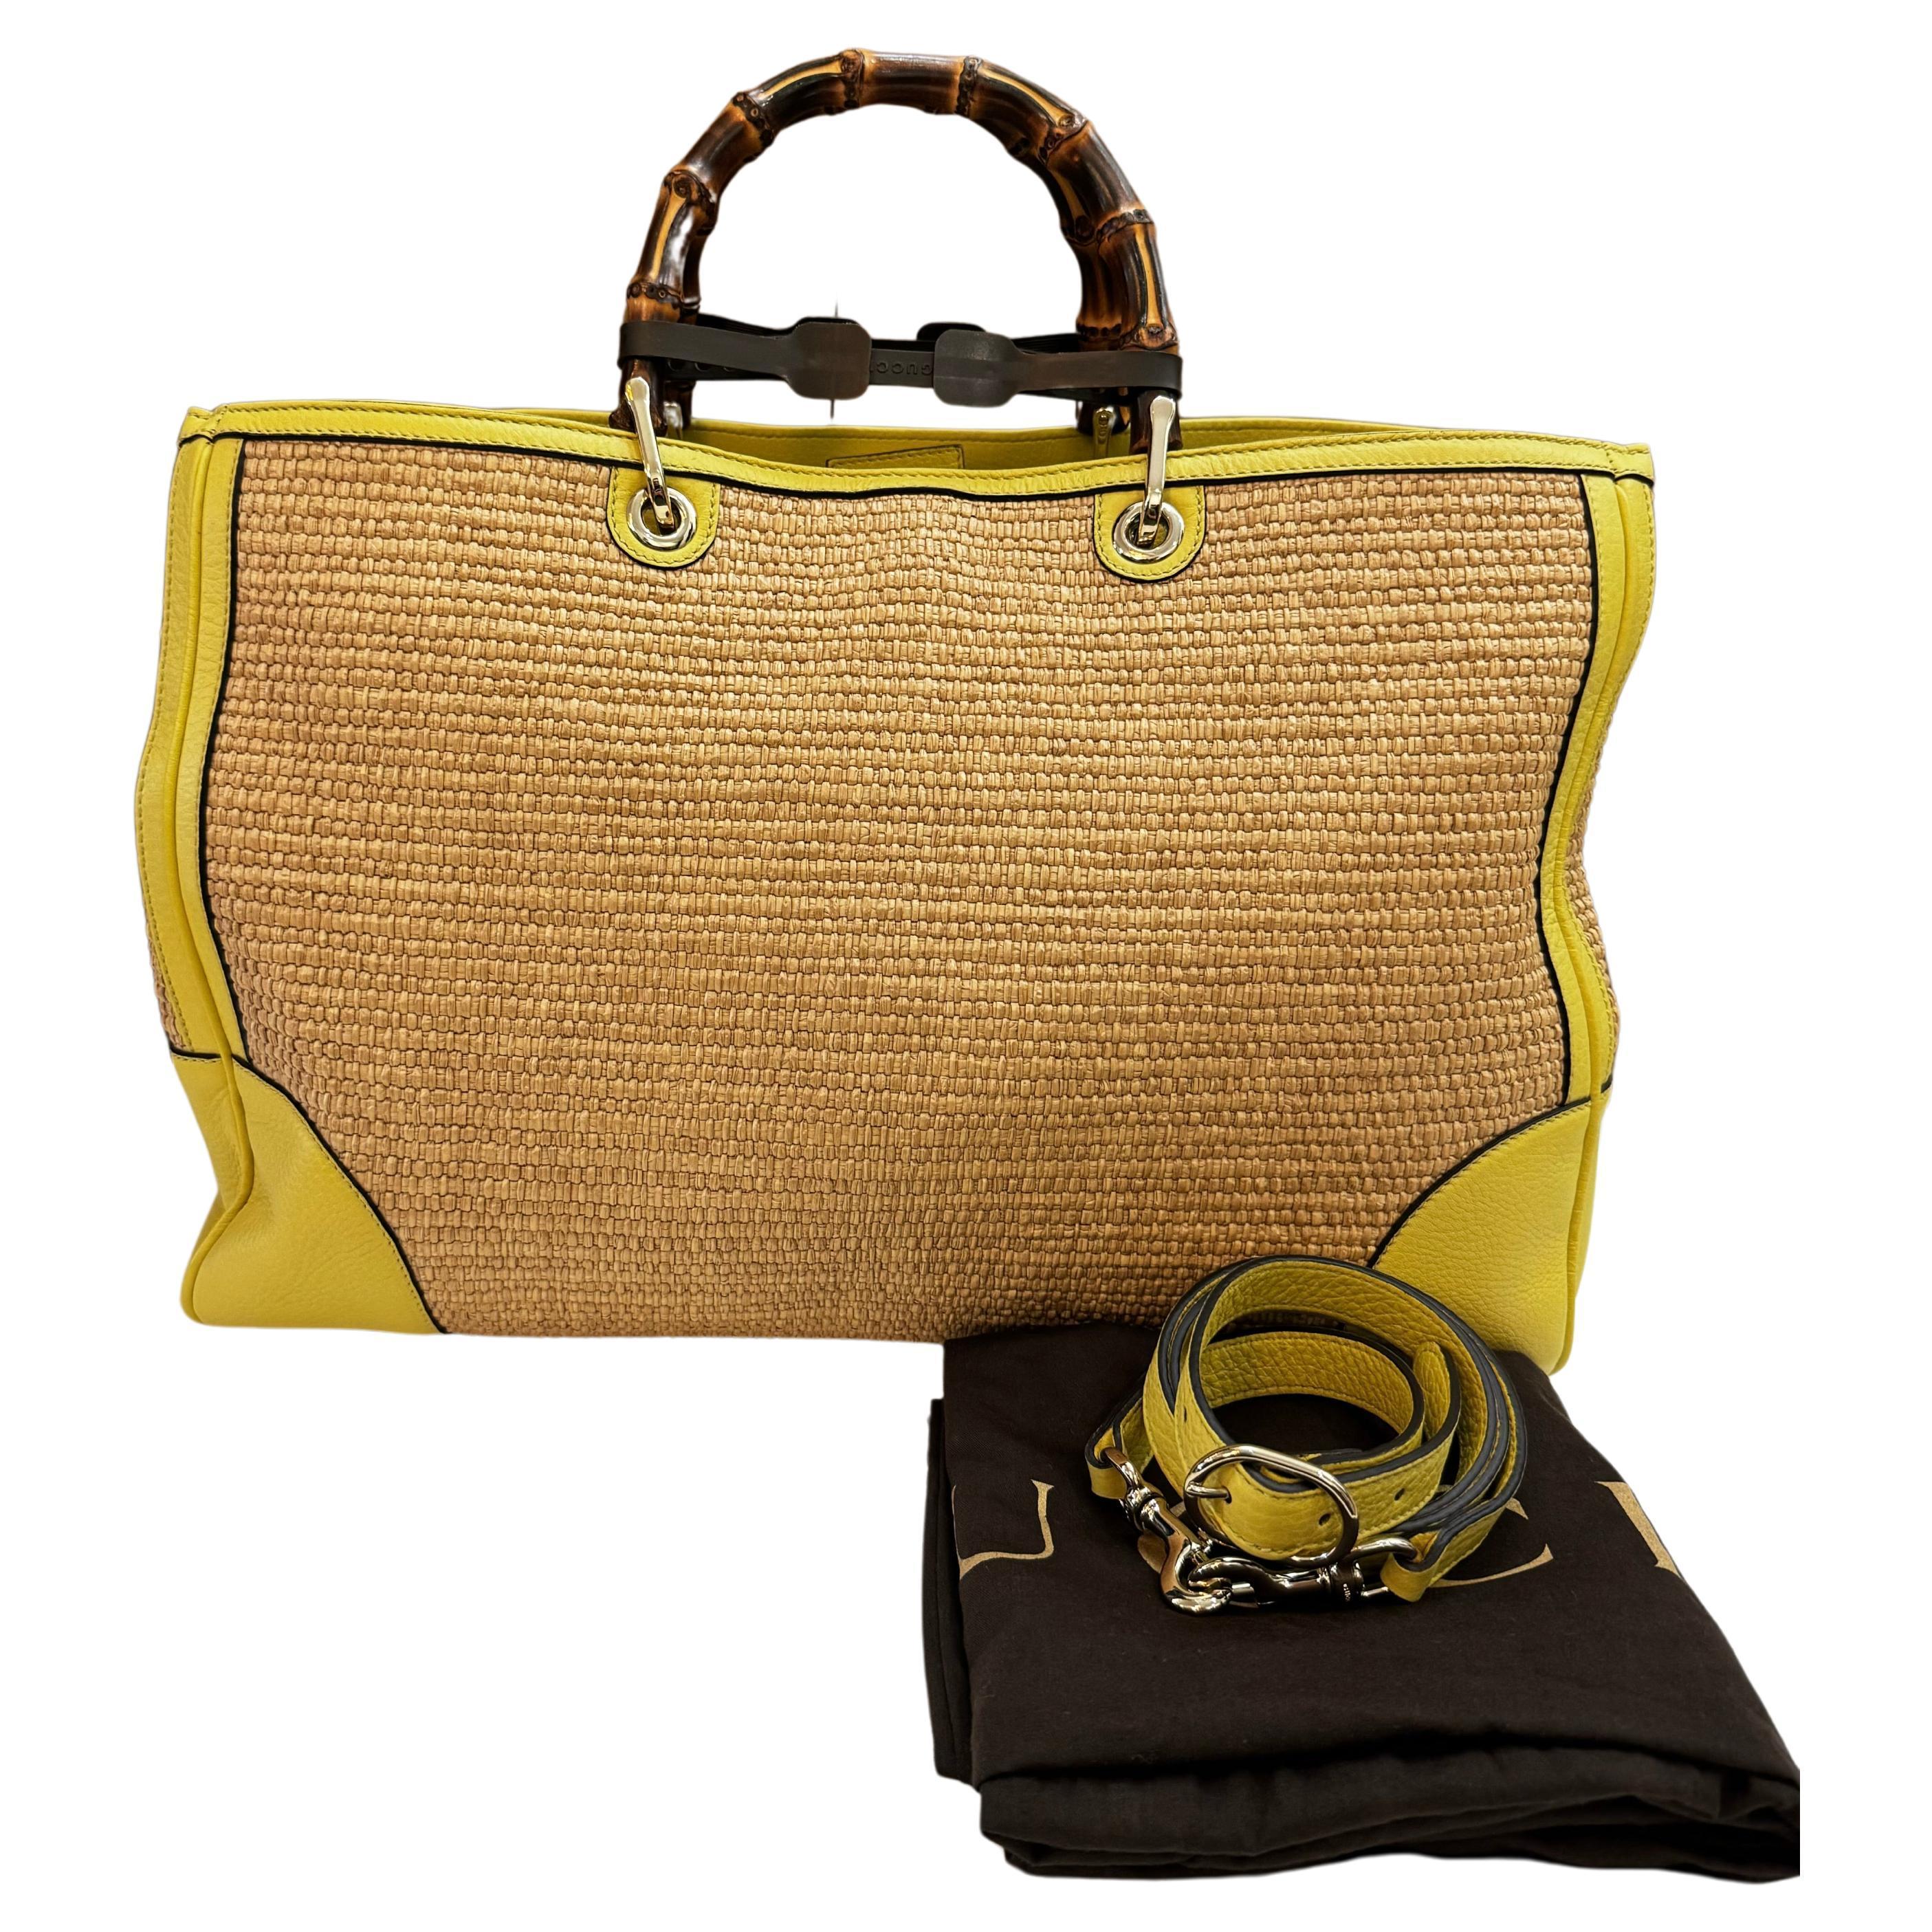 This large GUCCI raffia bamboo tote bag is crafted of woven straw in its natural color with calfskin leather in yellow featuring gold toned hardware and sturdy bamboo handles. Wide top magnetic closures open to a striped canvas interior featuring